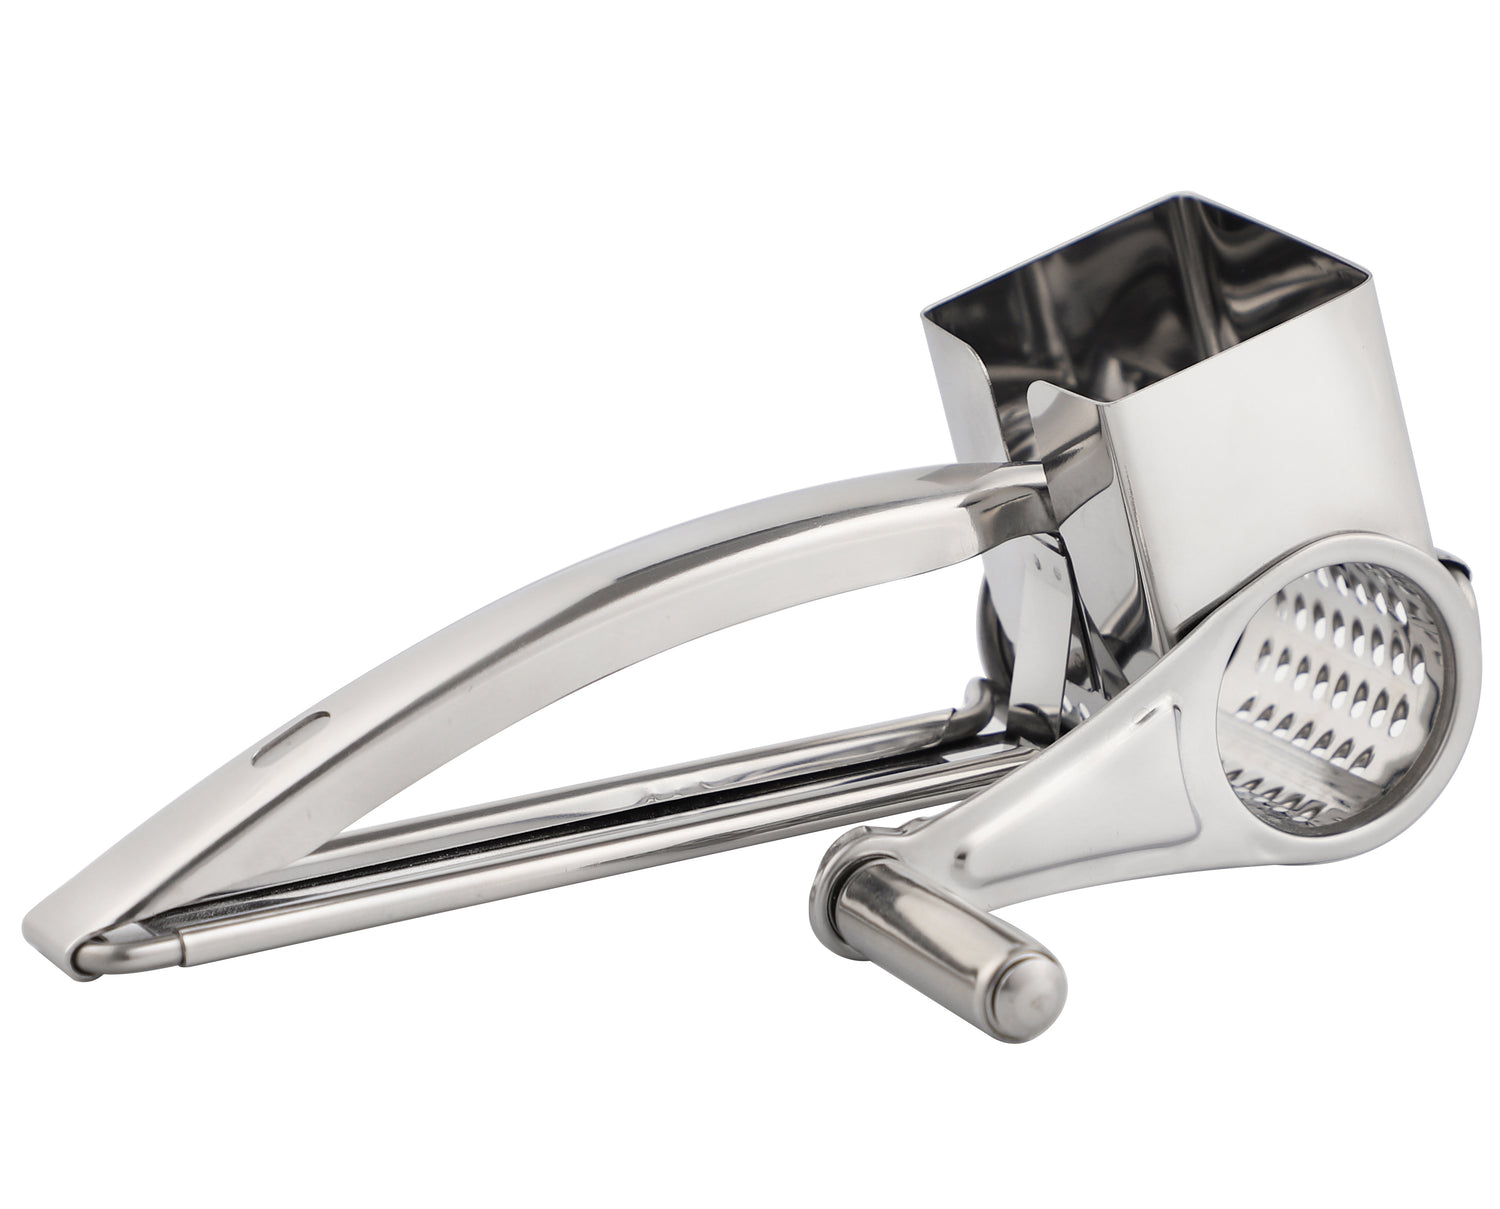 Cuisipro Foodservice Rotary Grater, Silver